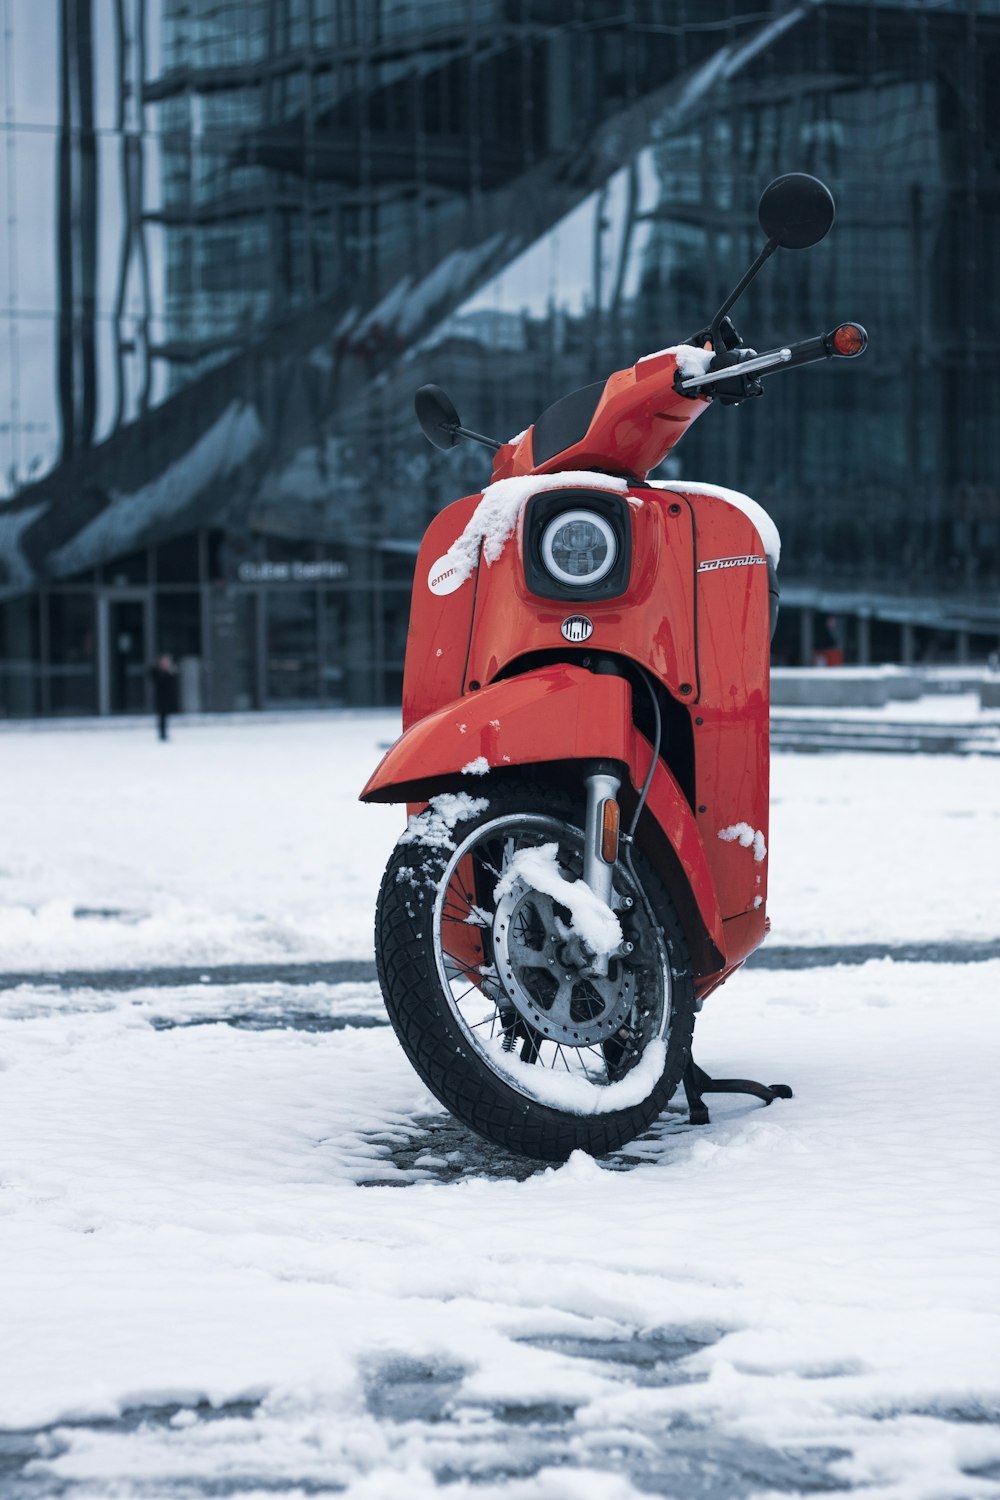 red and black motorcycle on snow covered ground during daytime